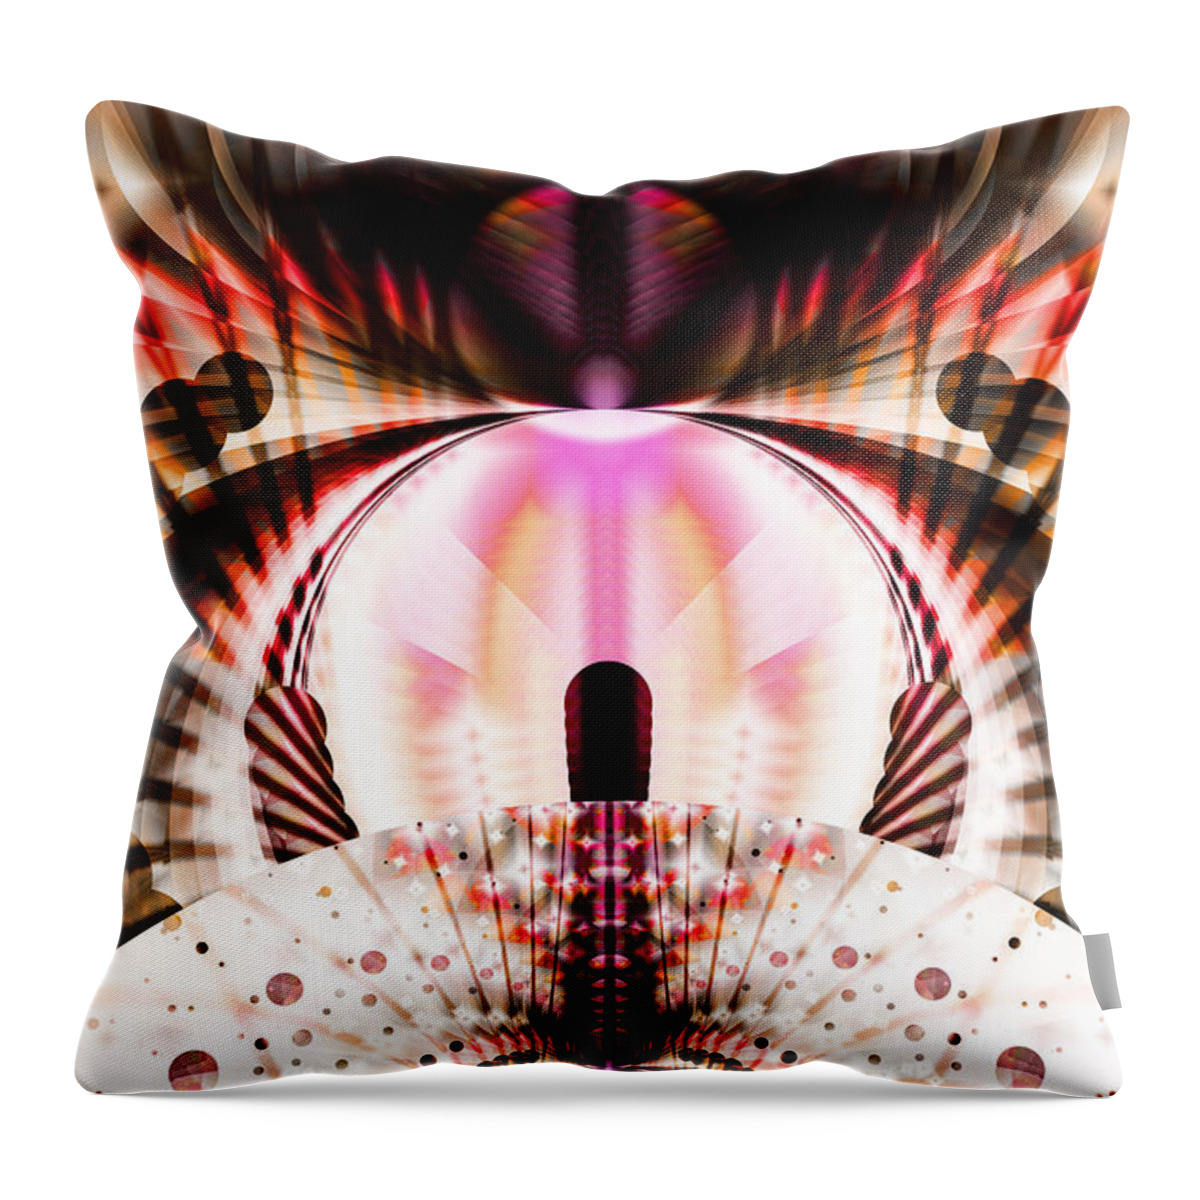 Machine Throw Pillow featuring the digital art The Machine by Frederic Durville